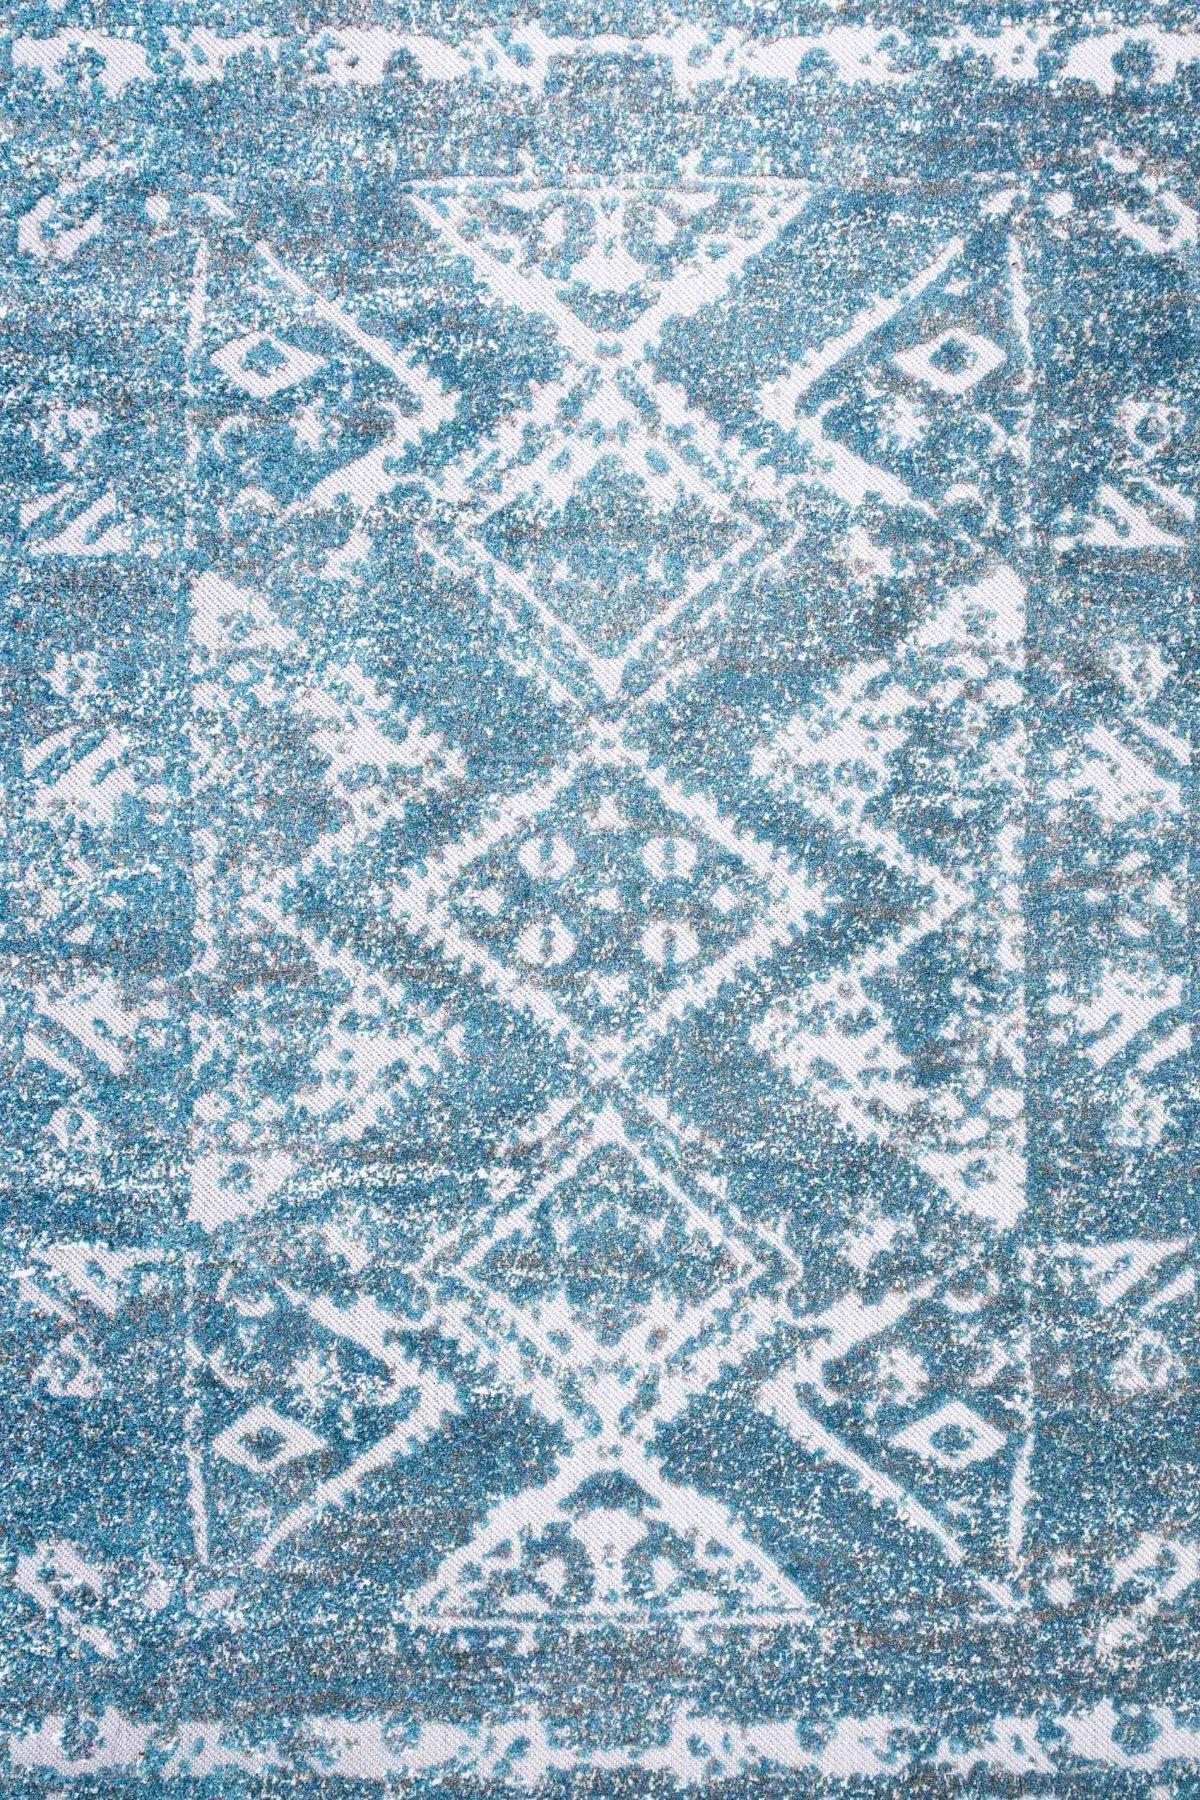 Distressed Blue Outdoor, Garden and Patio Area Rug